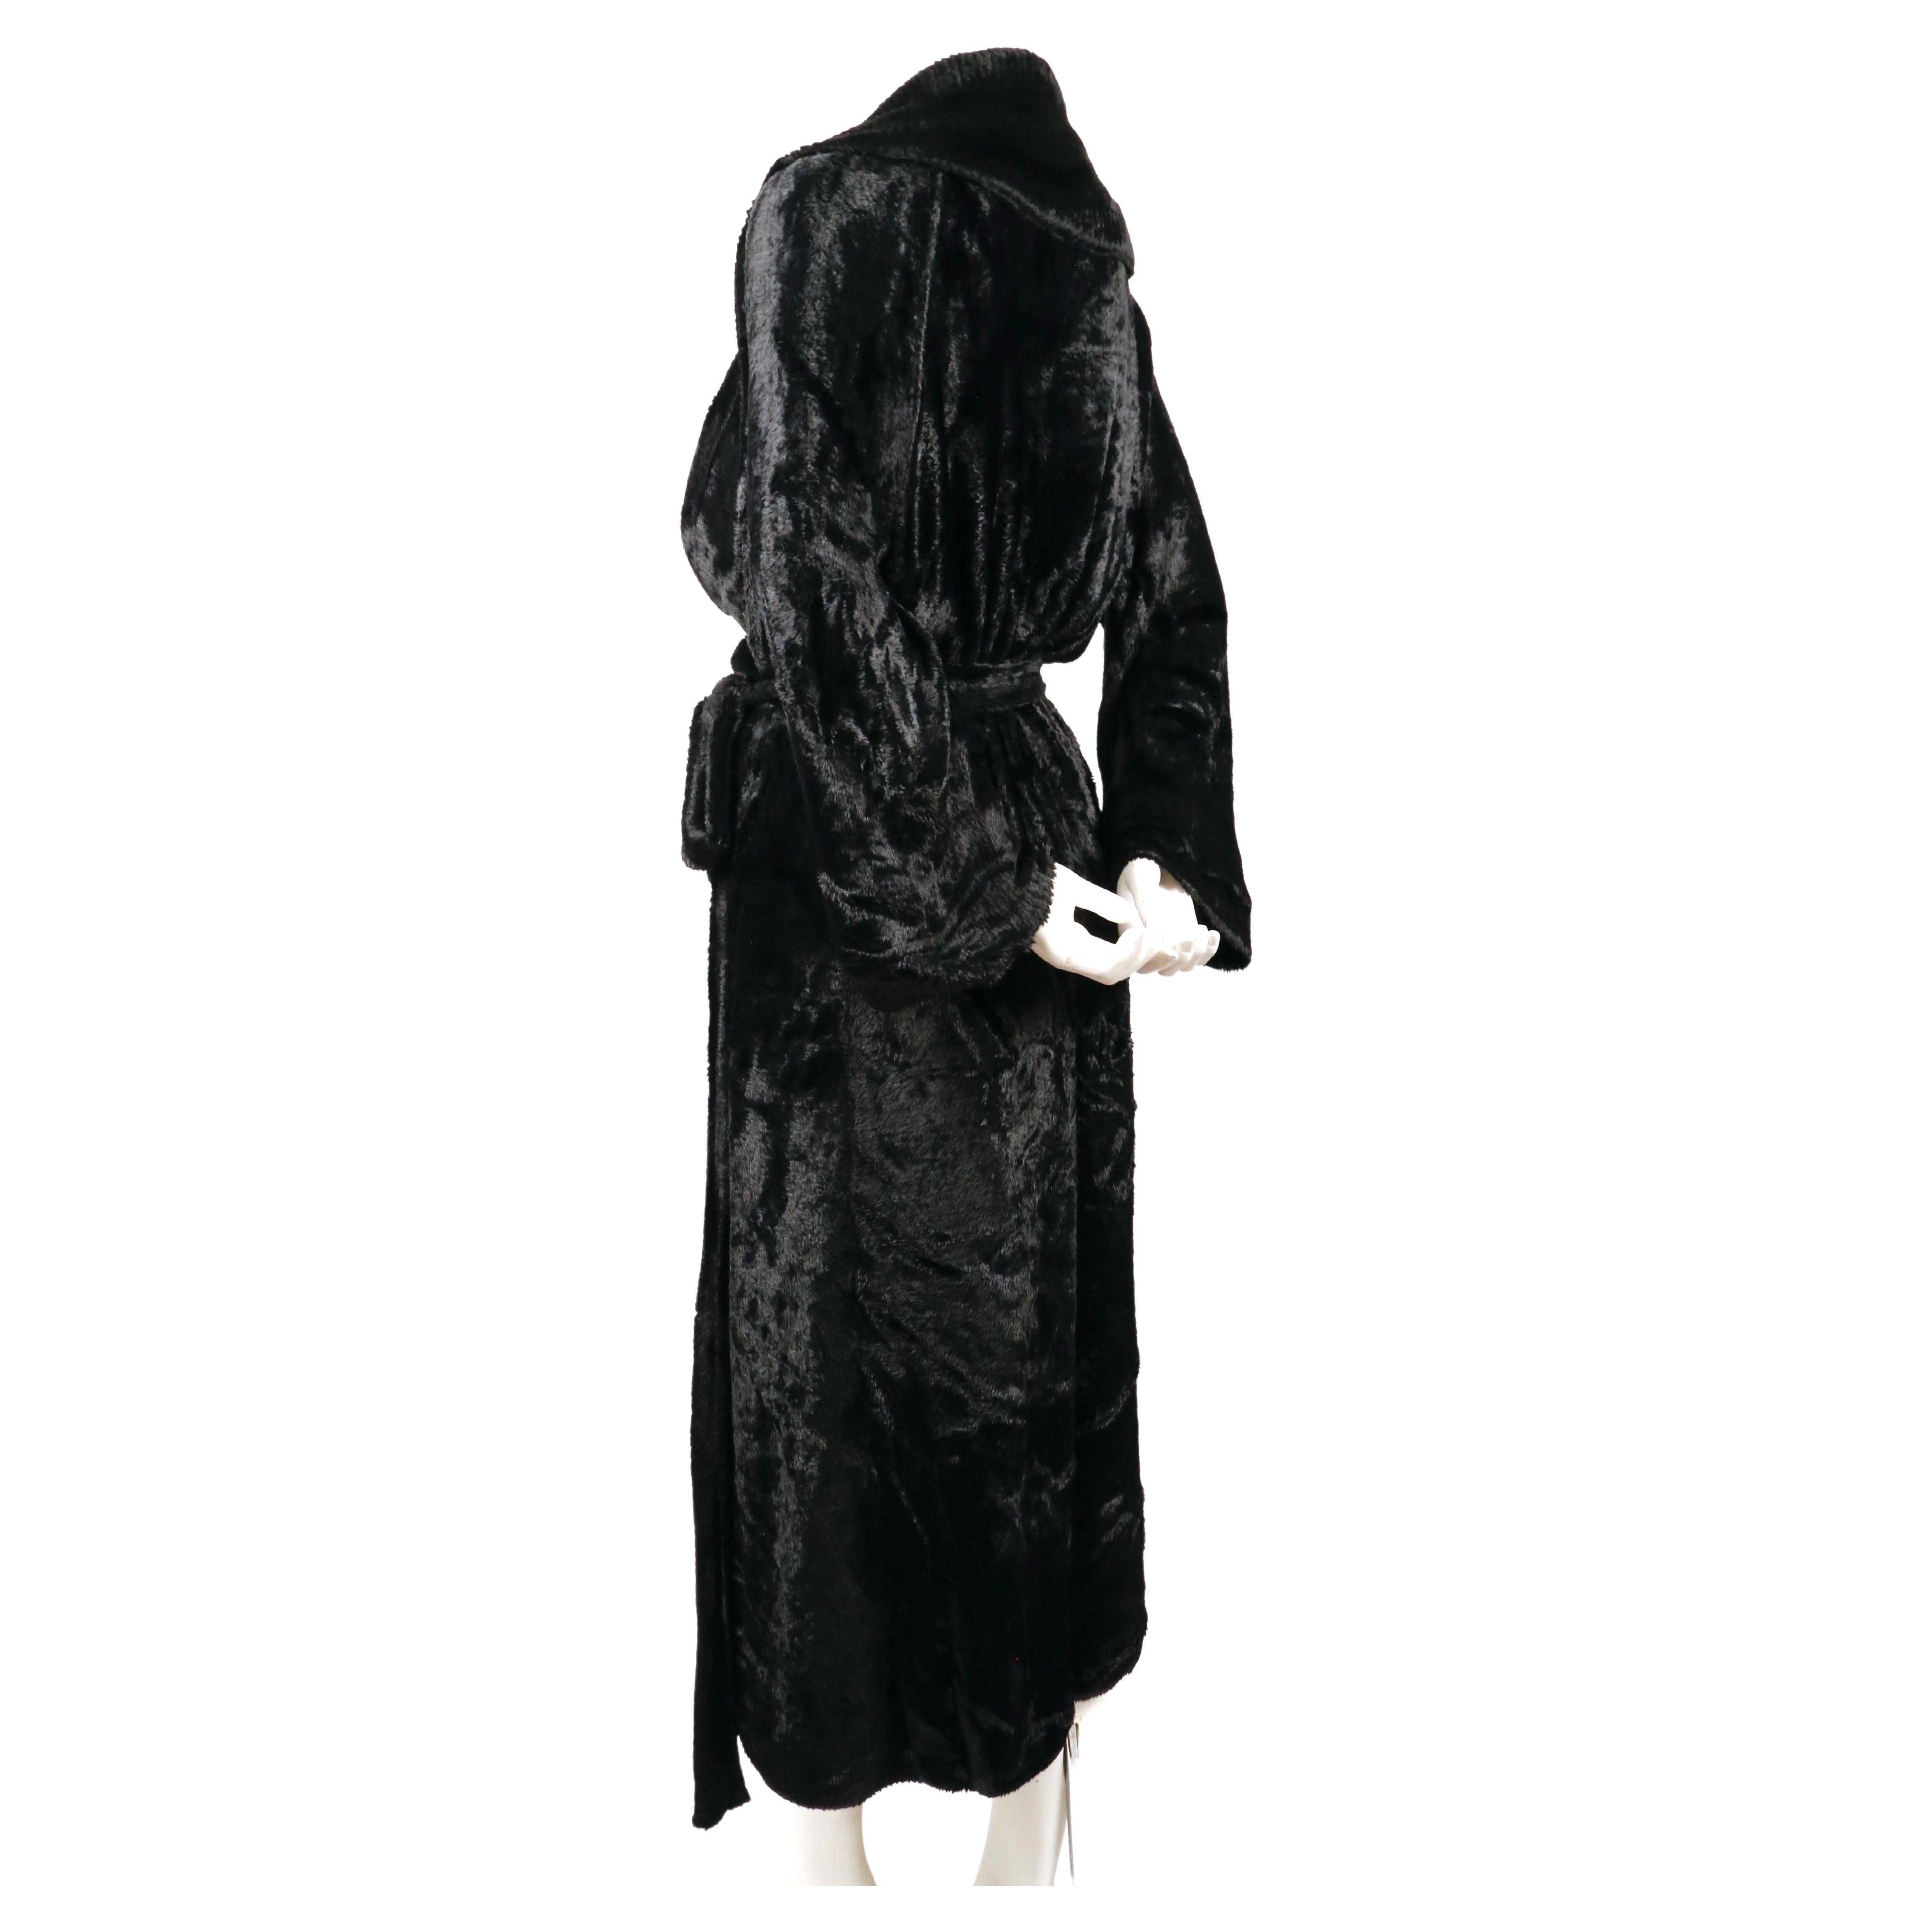 1992 AZZEDINE ALAIA black chenille runway robe coat In Excellent Condition For Sale In San Fransisco, CA